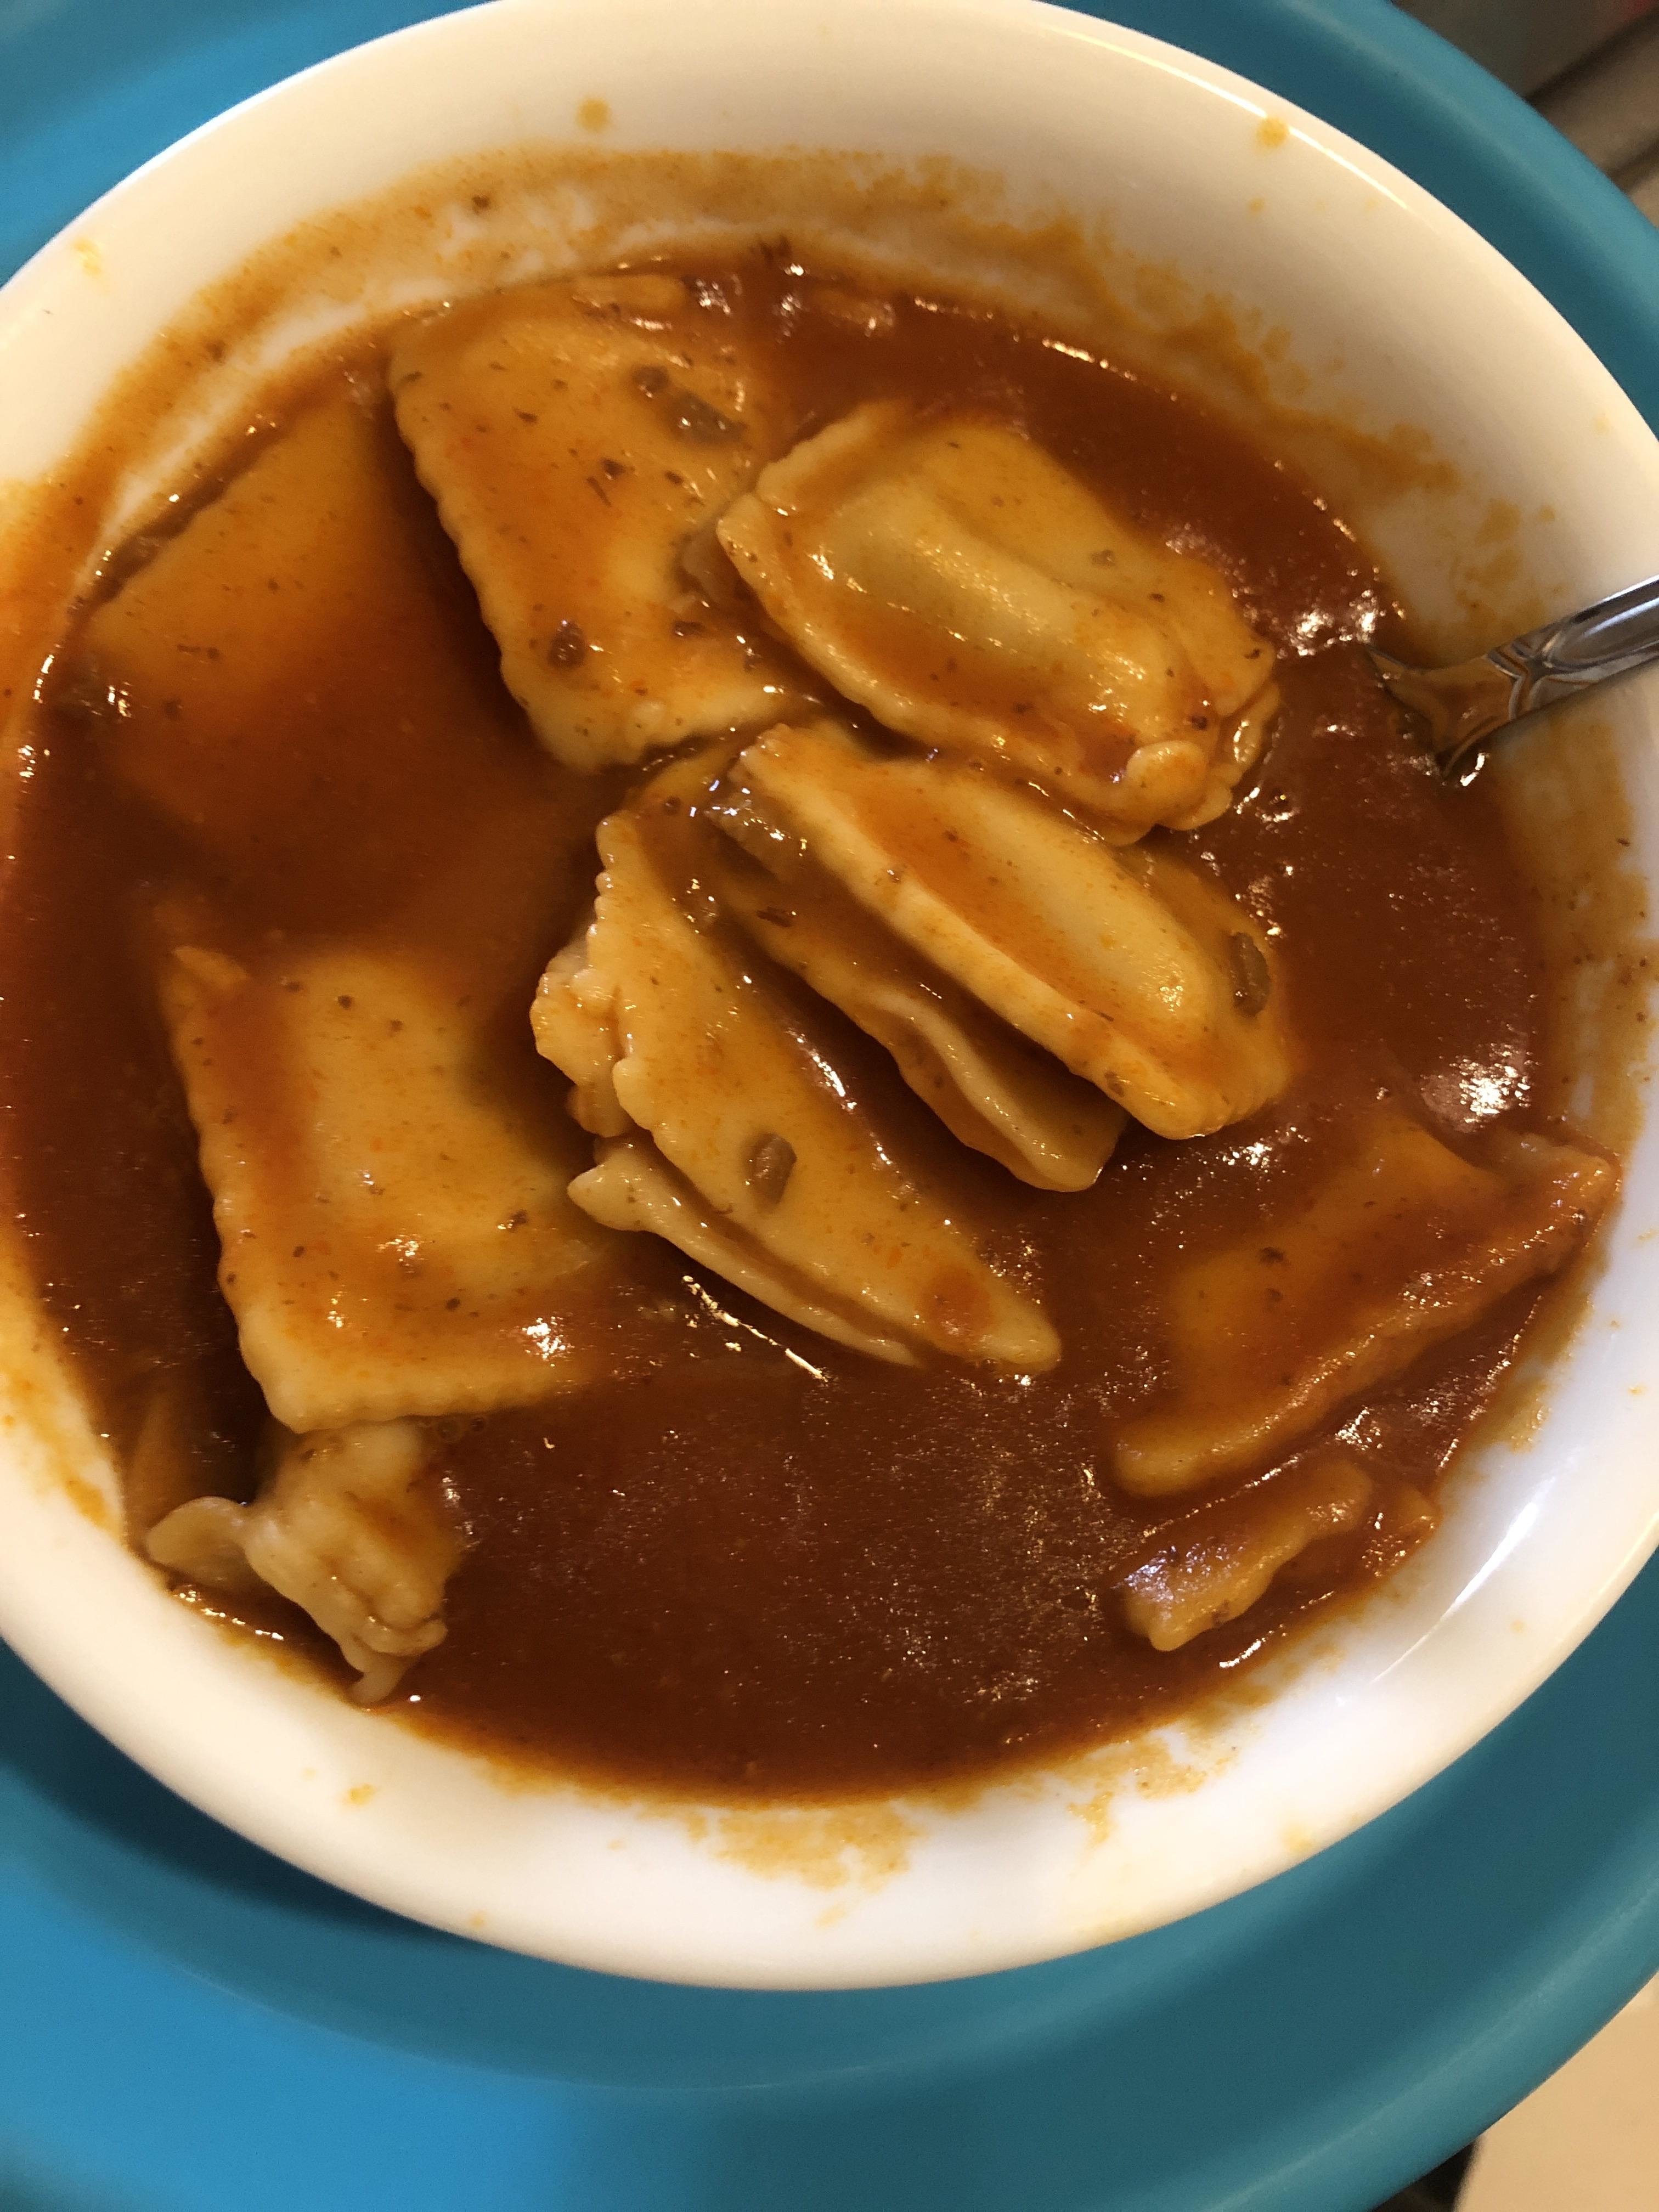 A bowl of ravioli with sauce and a spoon